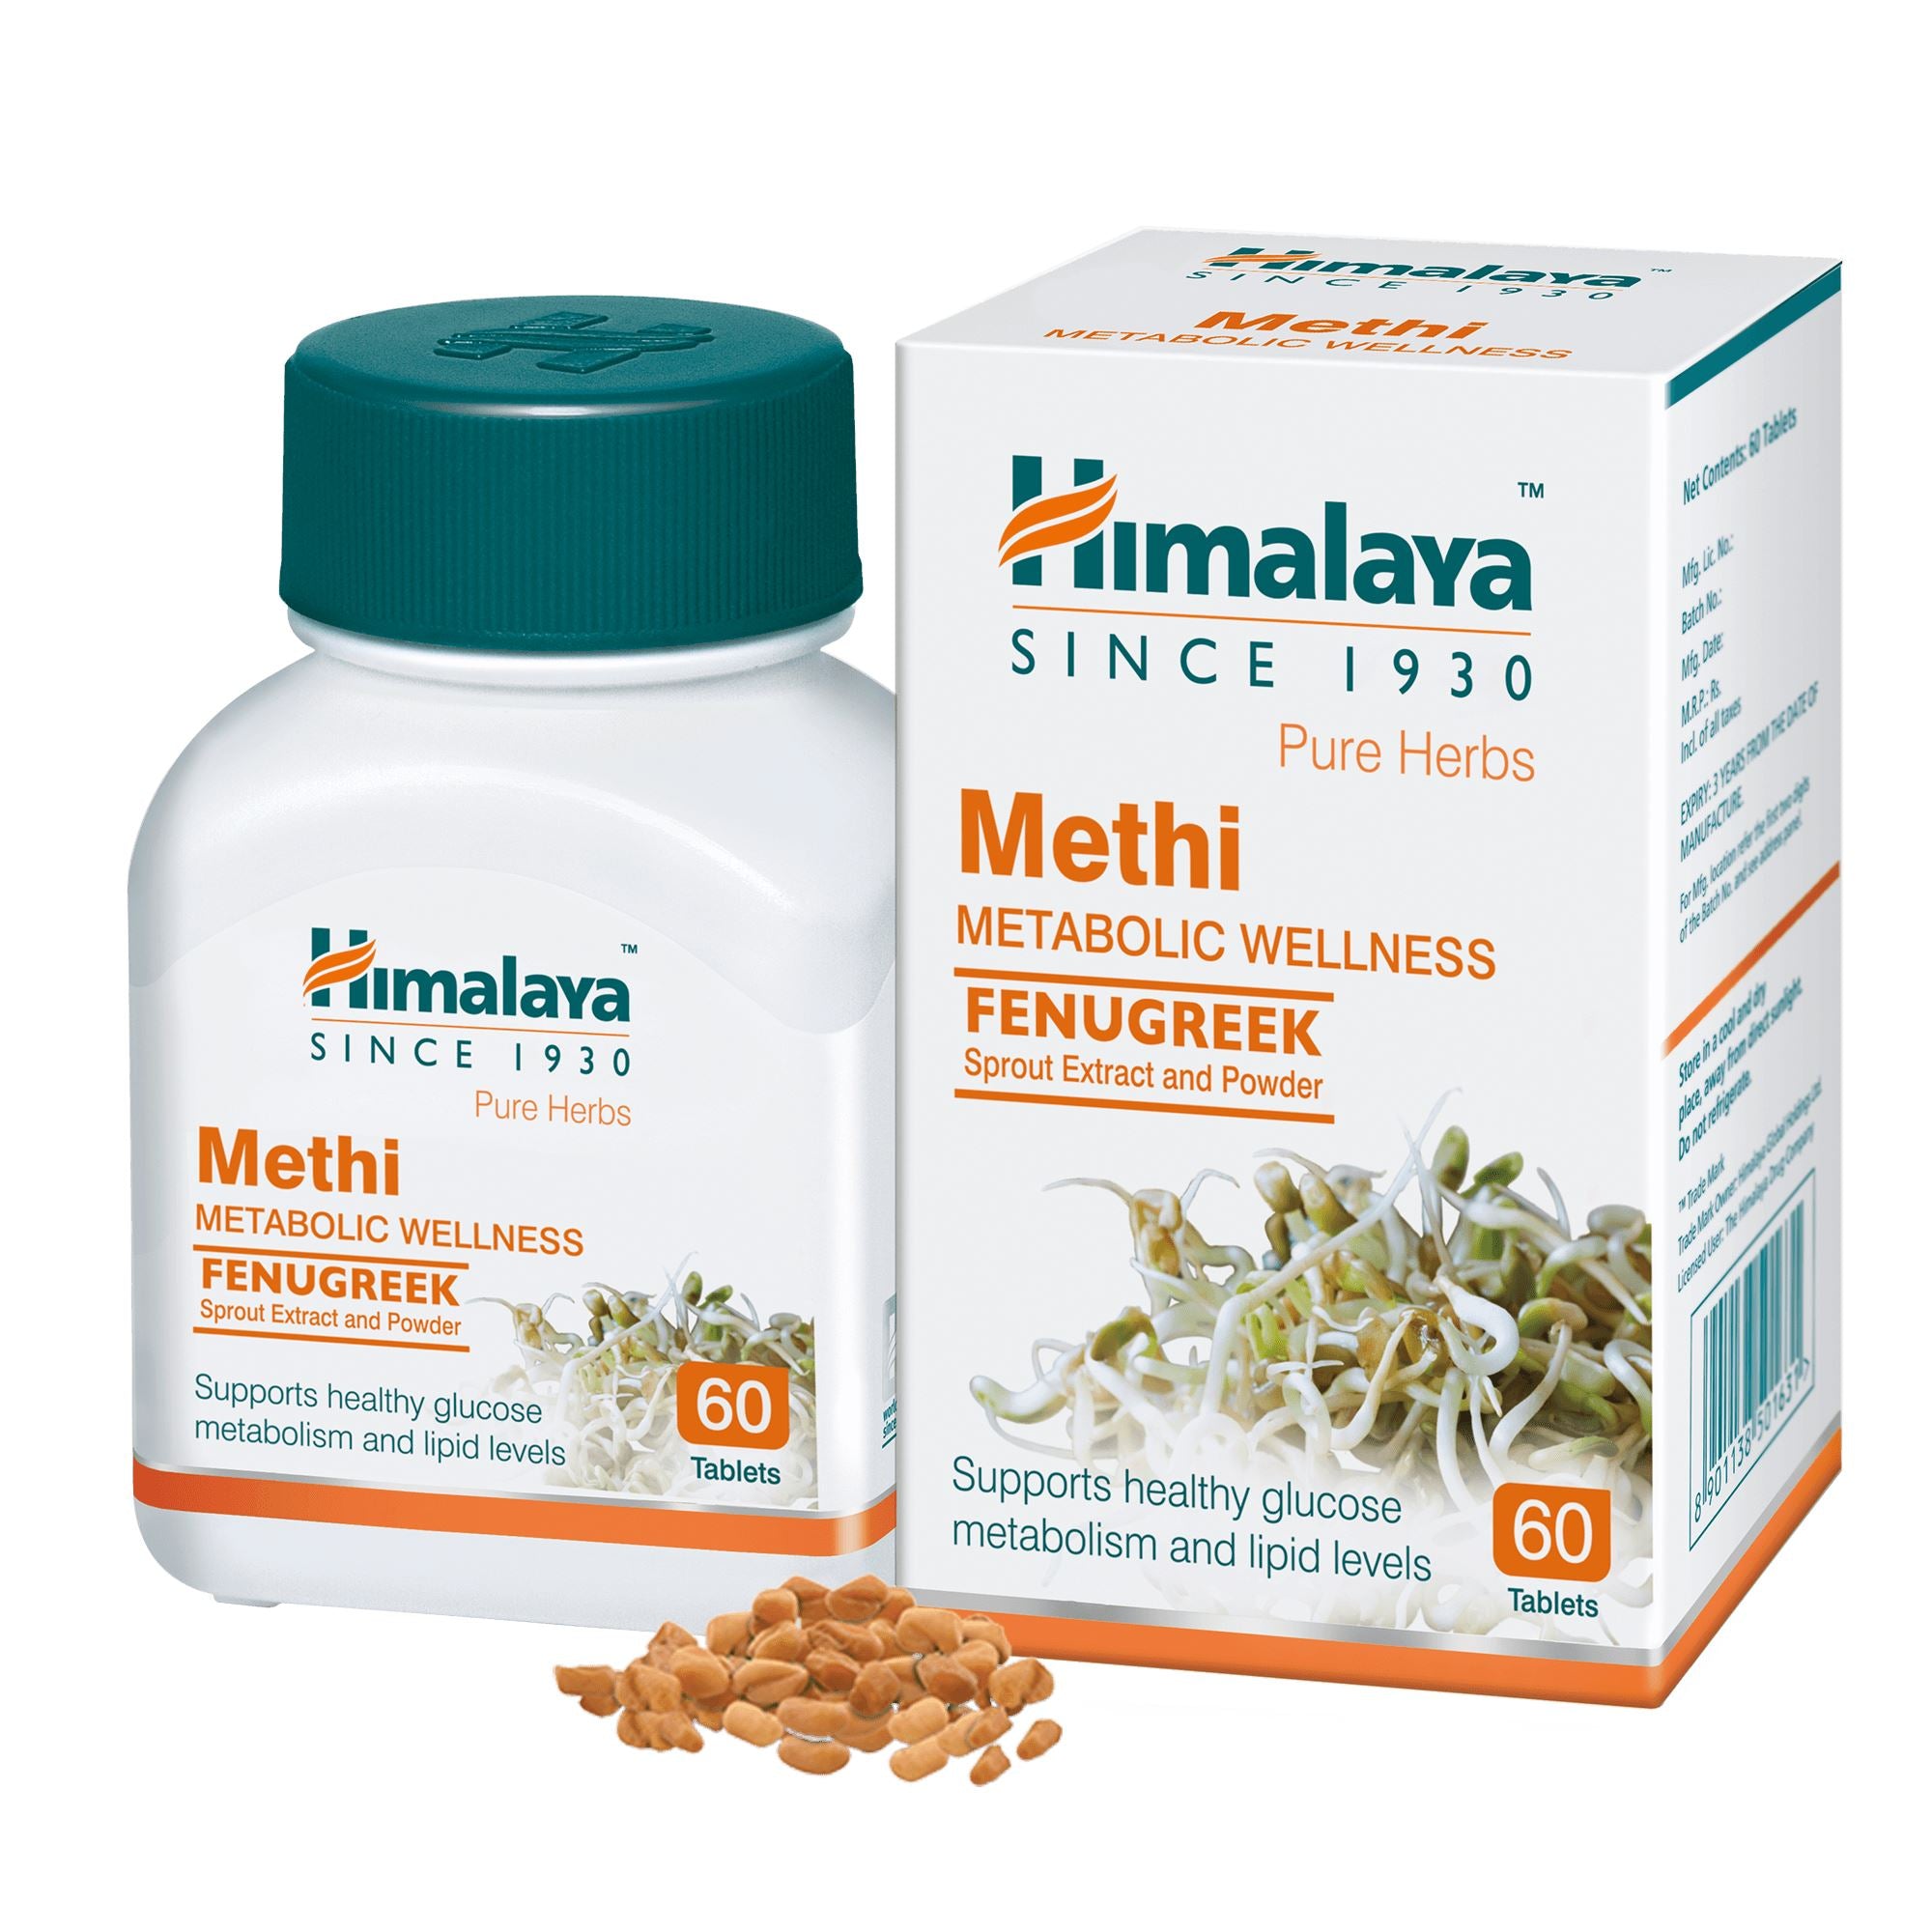 Himalaya Methi tablets - Supports healthy glucose metabolism and lipid levels